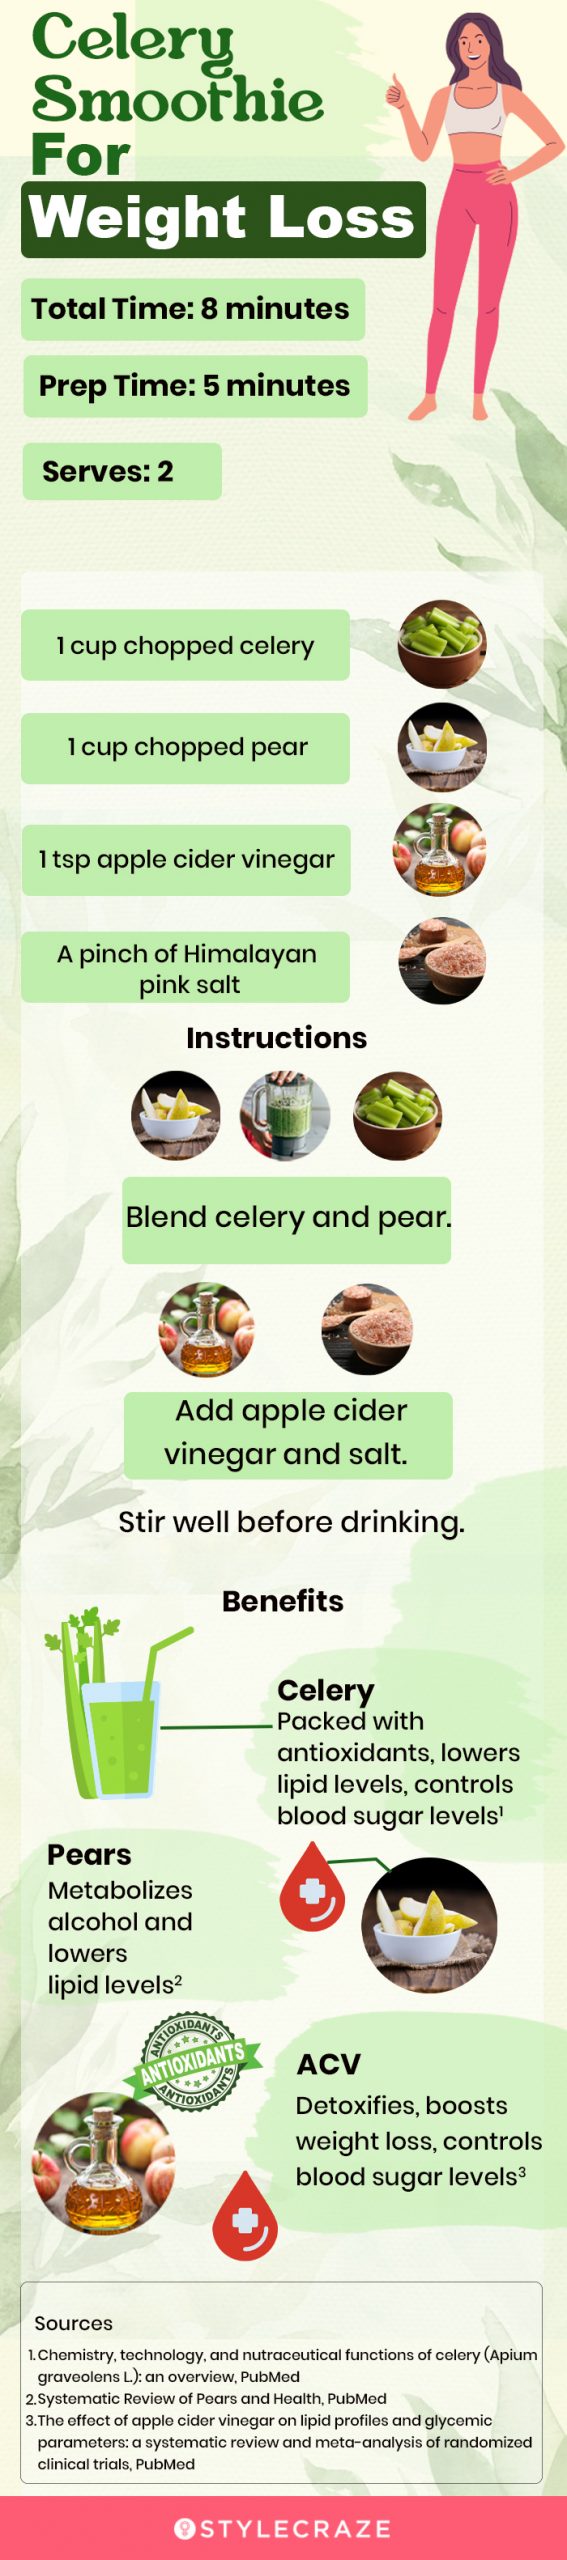 celery smoothie for weight loss [infographic]